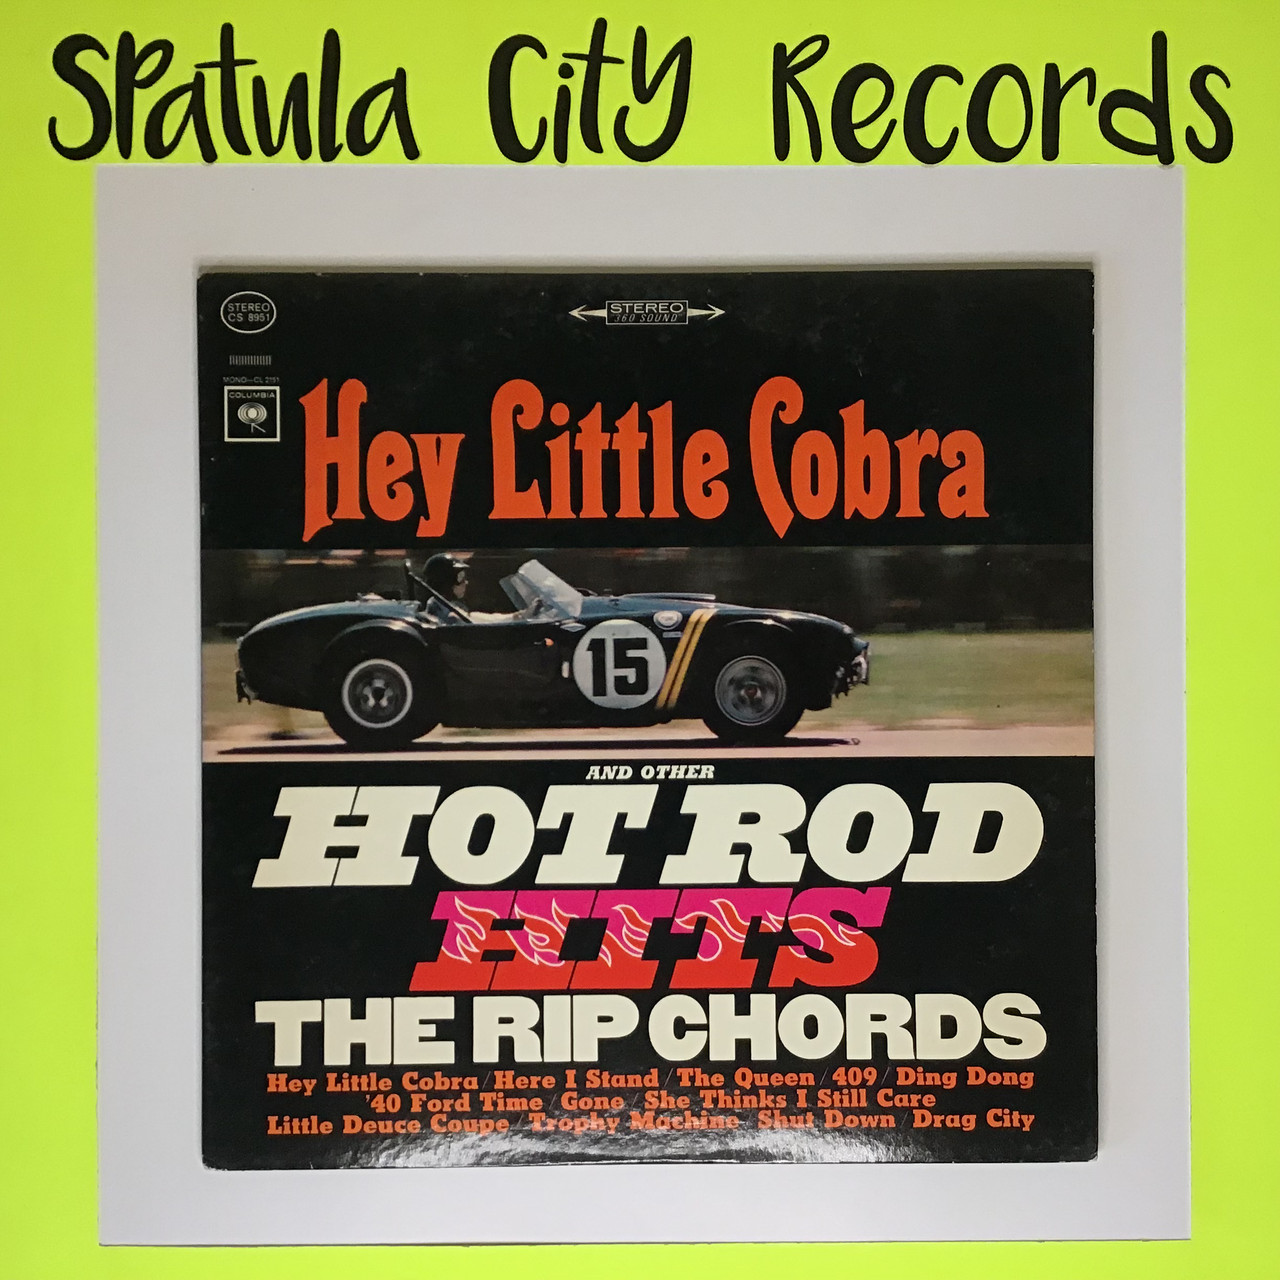 Rip Chords, The - Hey Little Cobra and Other Hot Rod Hits  - vinyl record album LP